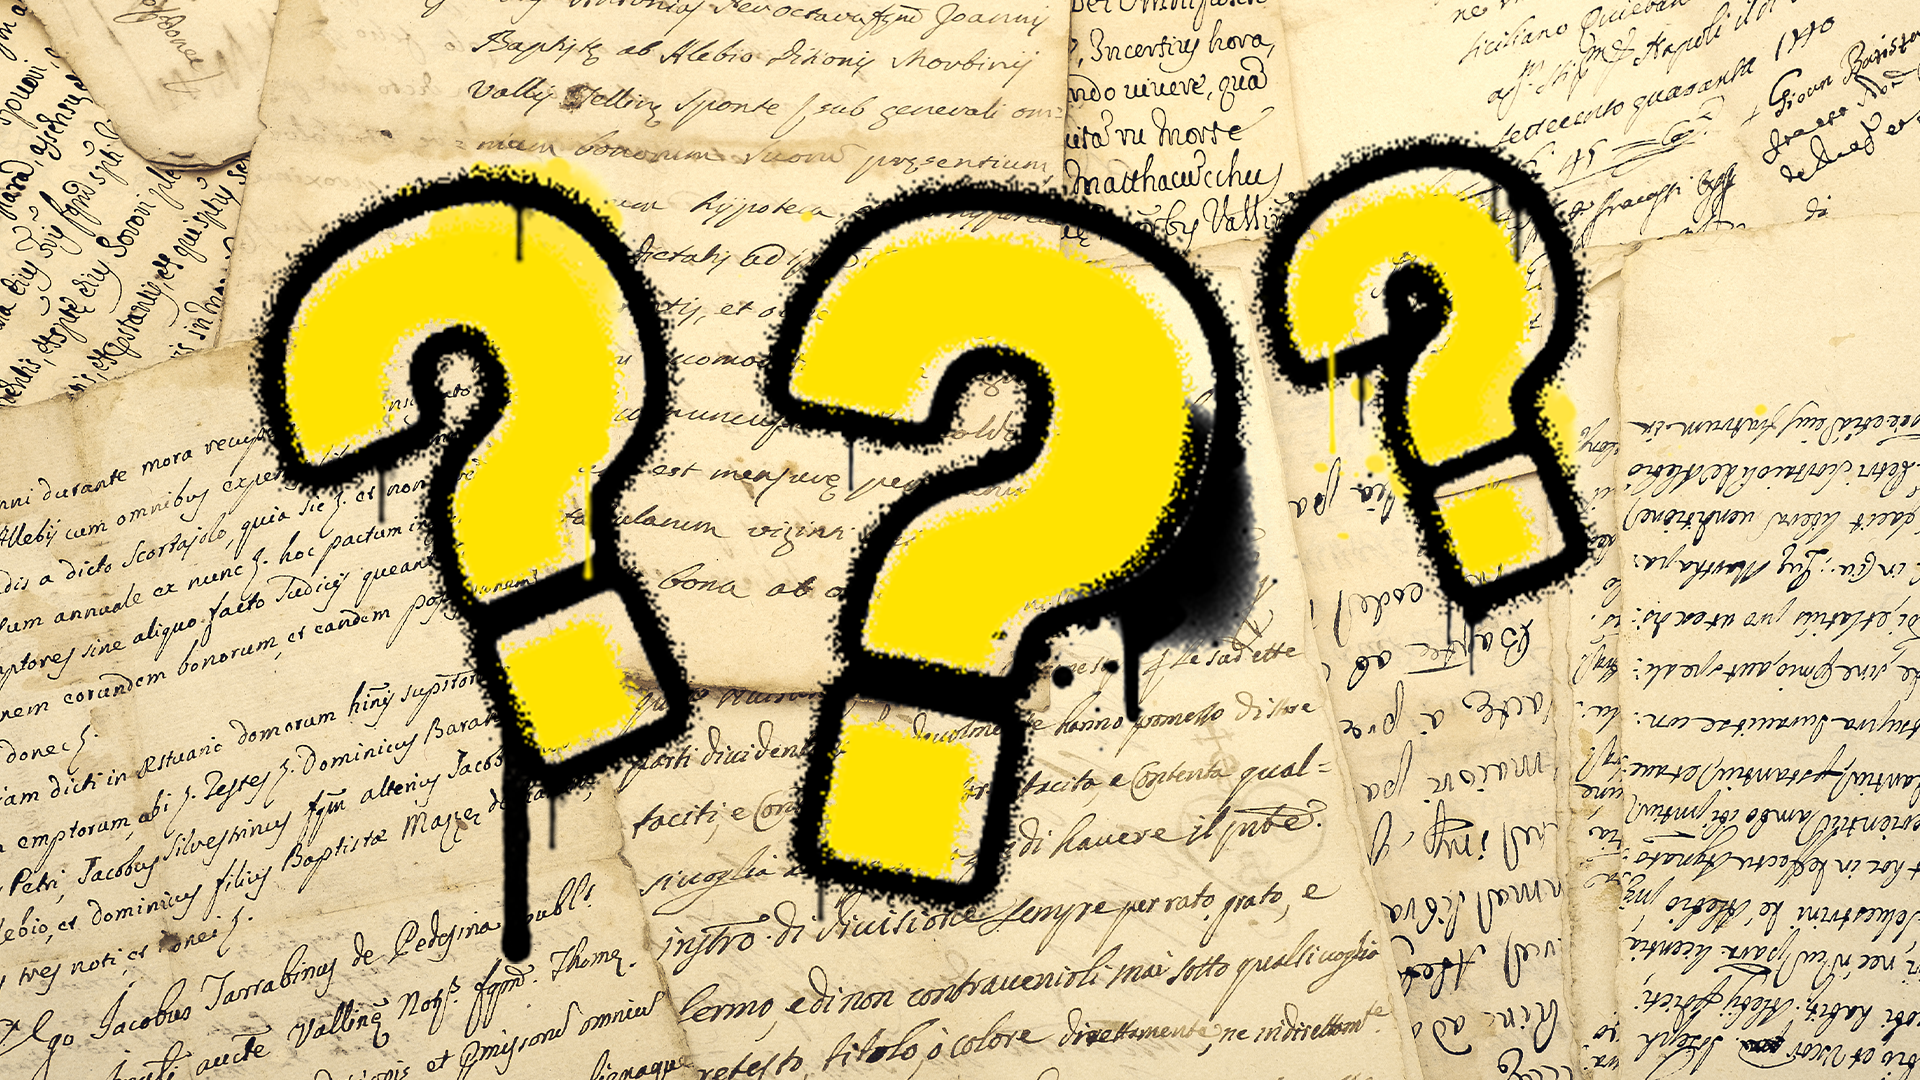 A manuscript and some question marks